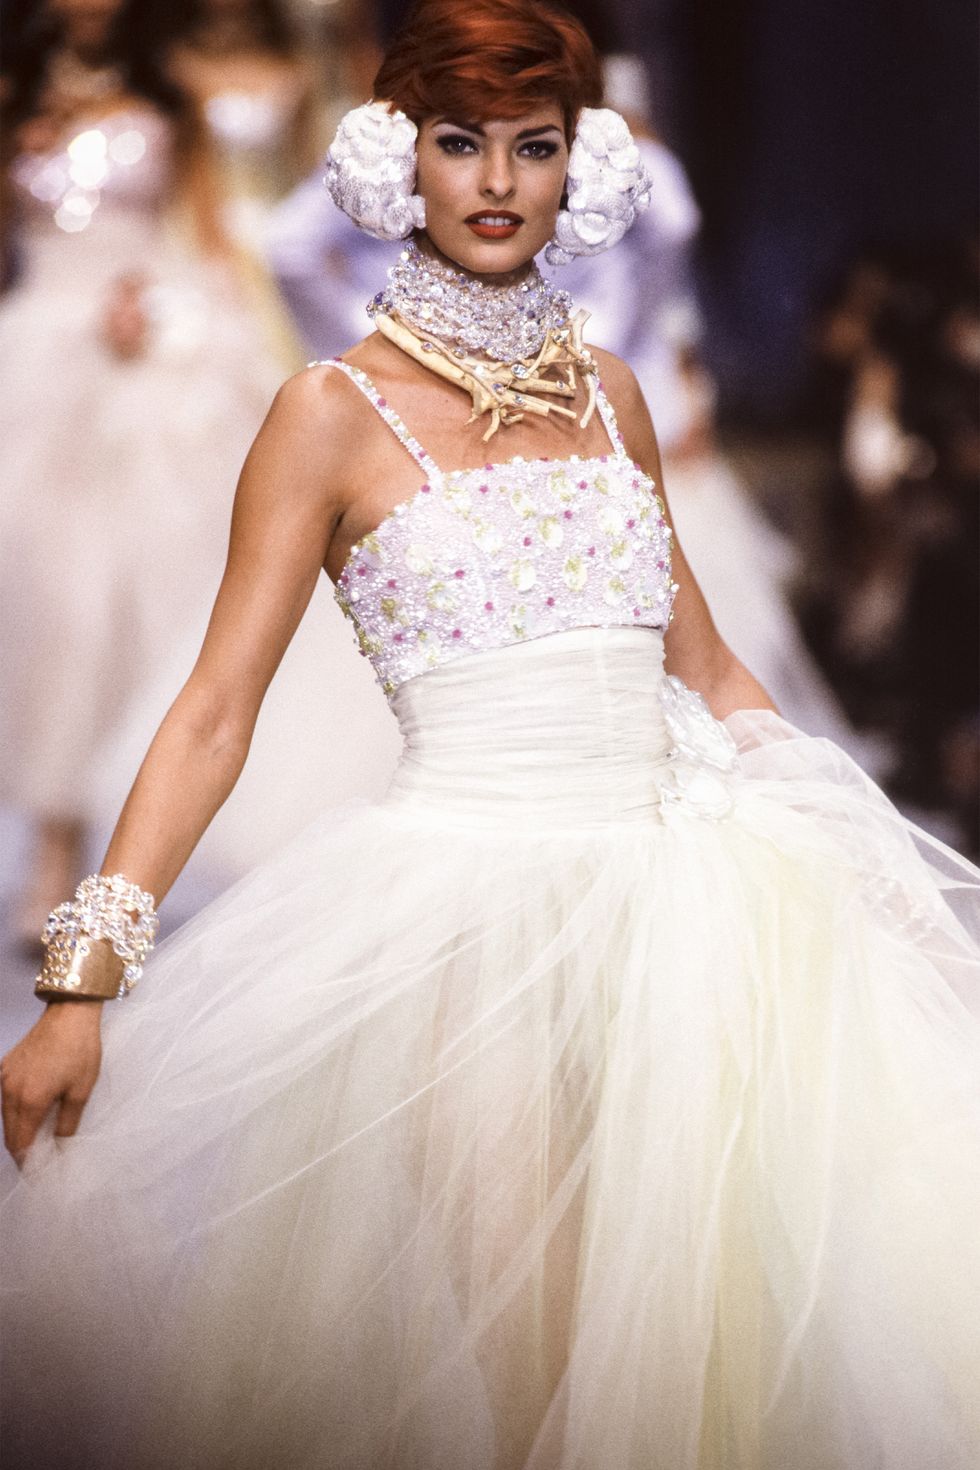 100 of Karl Lagerfeld's Best Chanel Runway Moments - Karl Lagerfeld Chanel  Designs